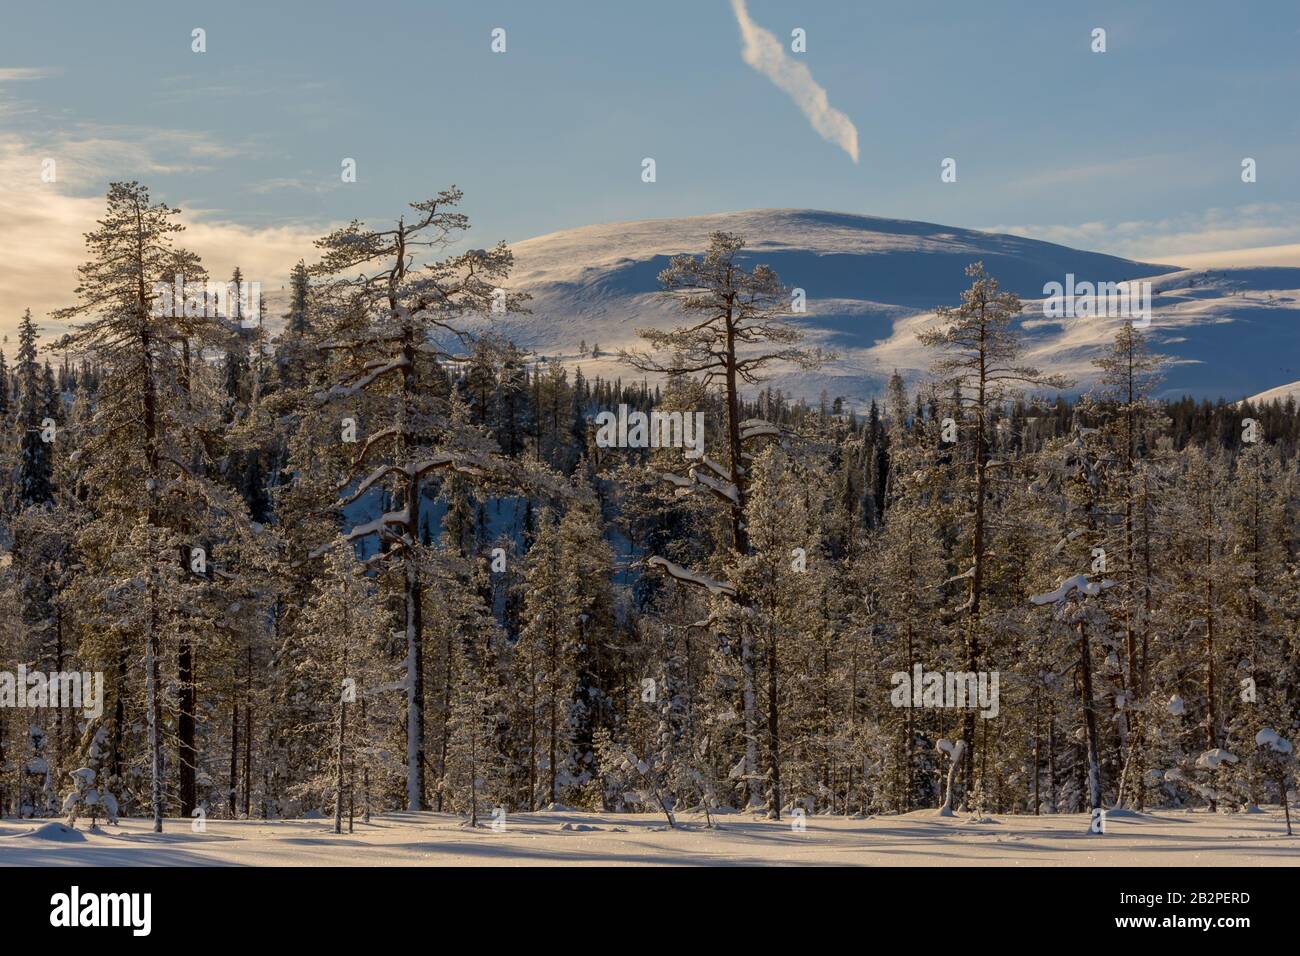 Snowy forest and fells in Lapland in Finland Stock Photo